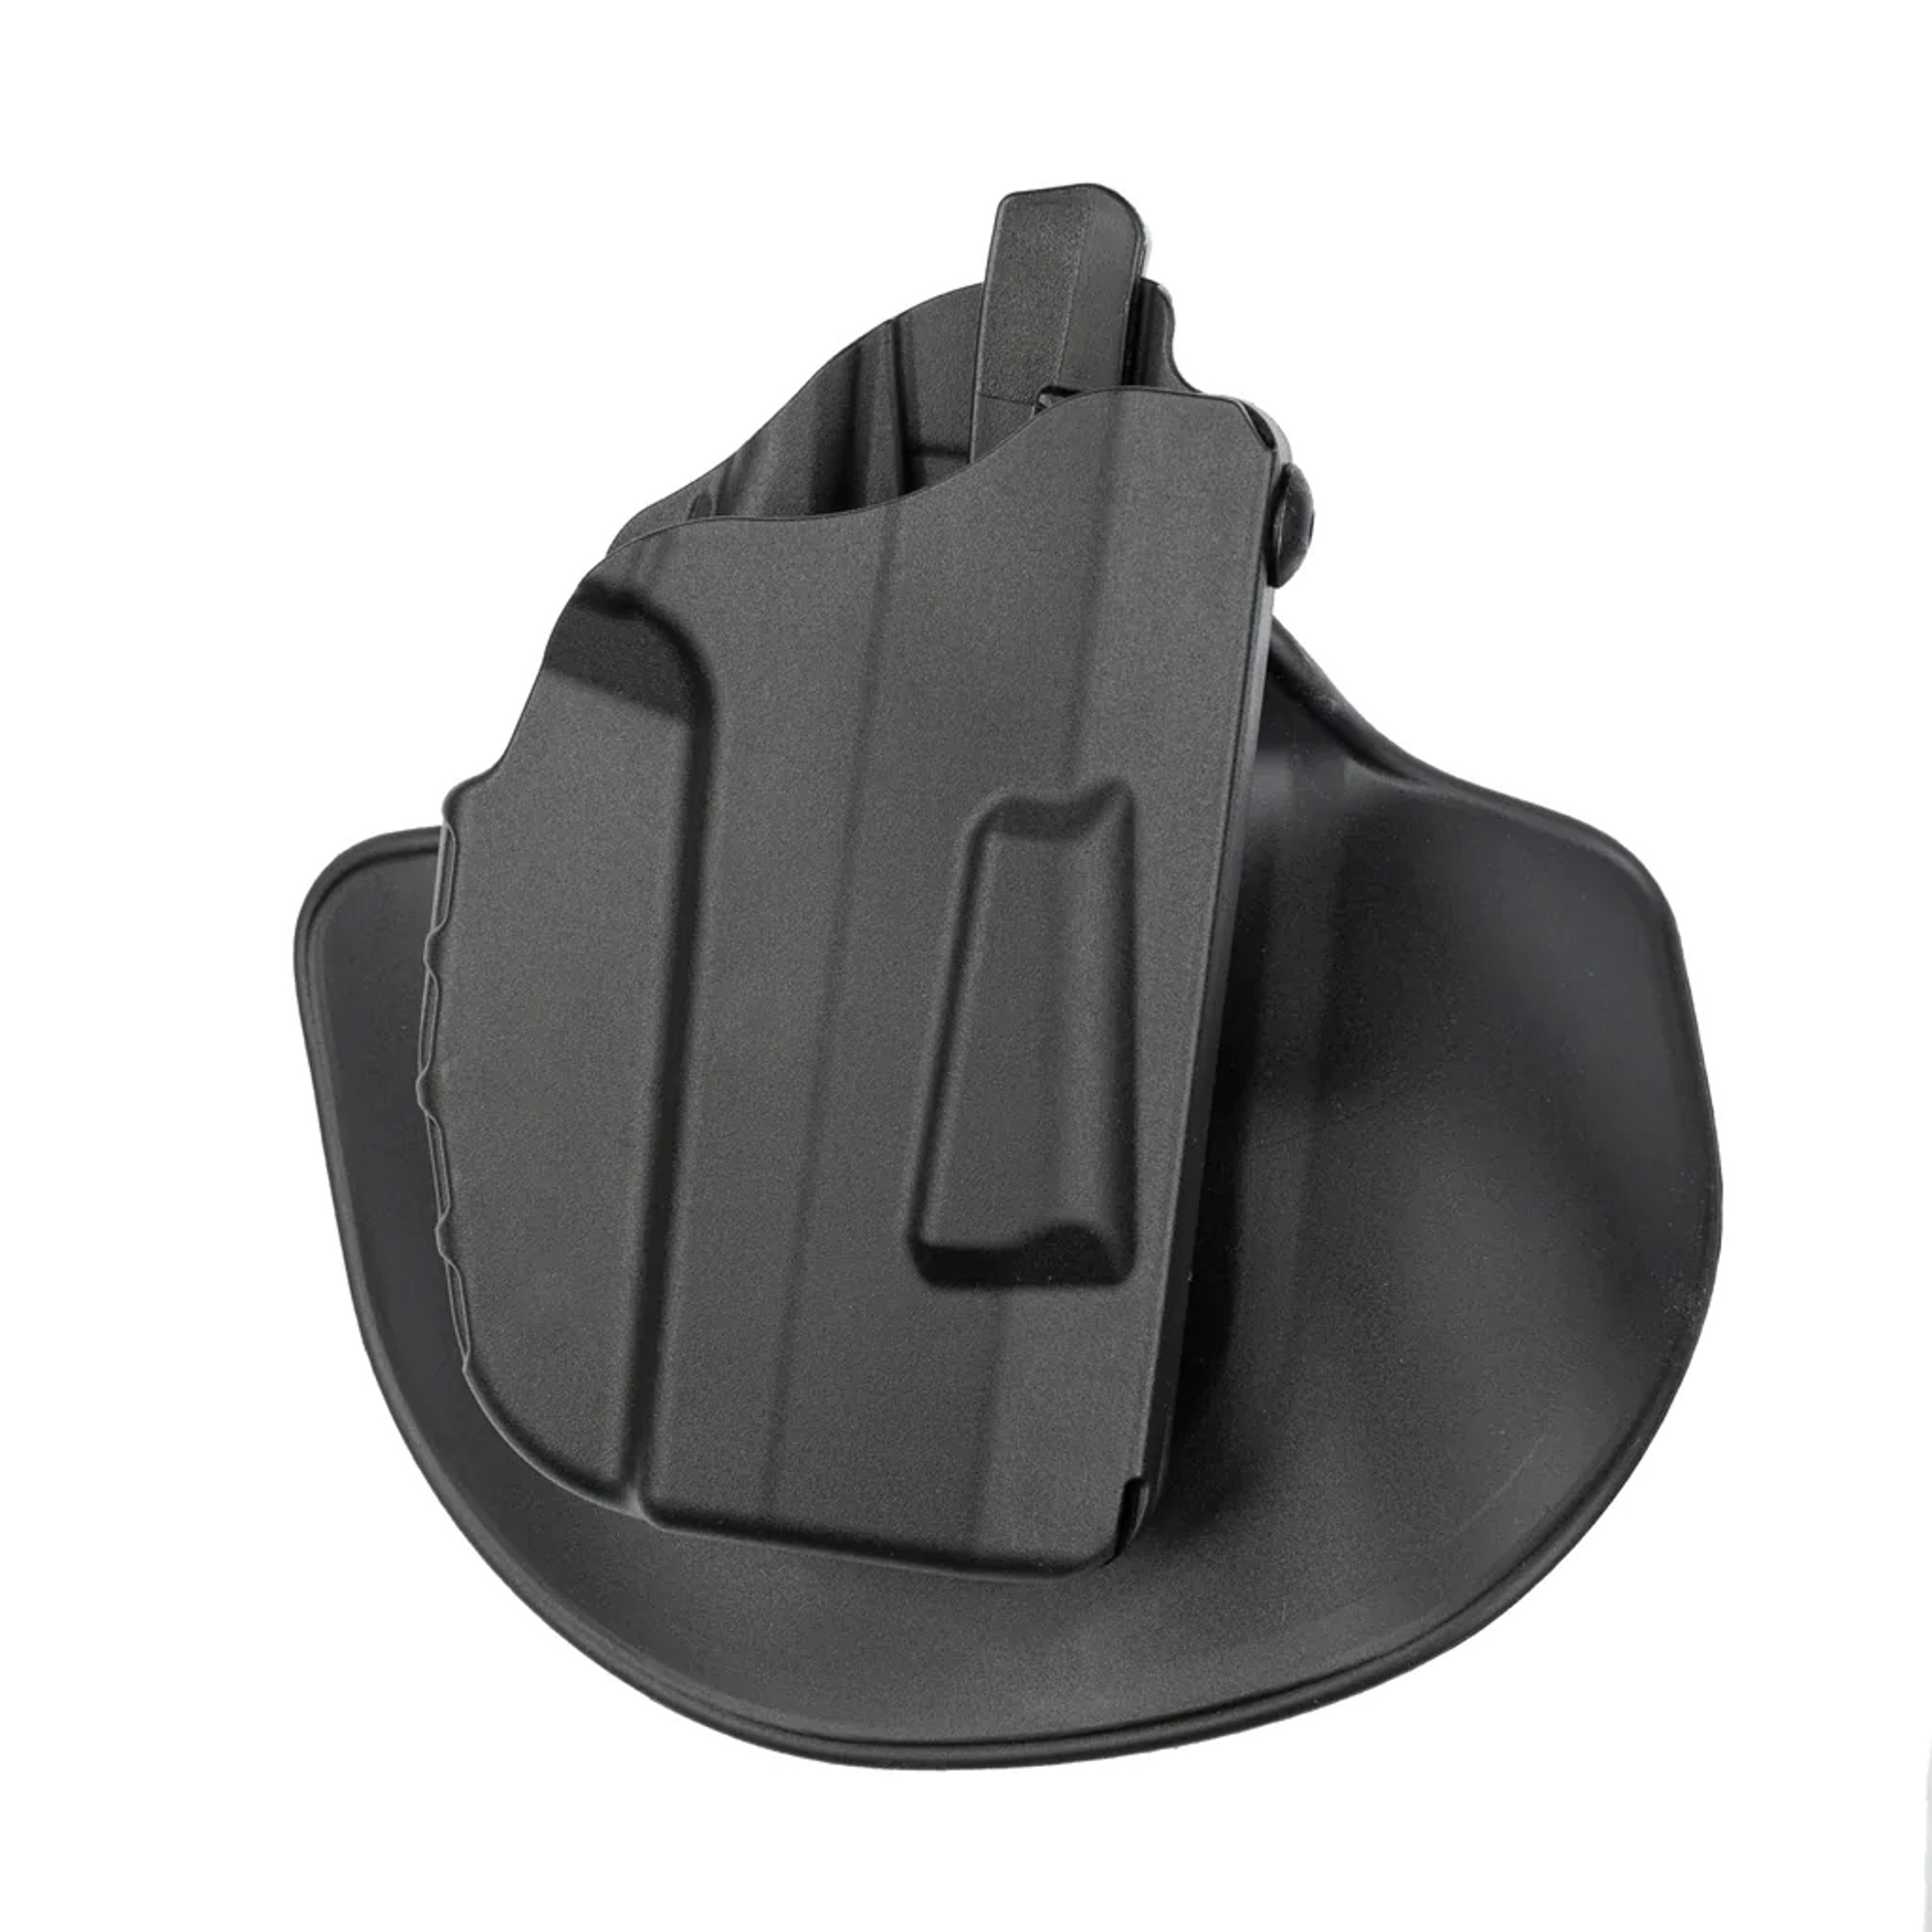 Model 7378 7ts Als Concealment Paddle And Belt Loop Combo Holster For Glock 19 W/ Compact Light